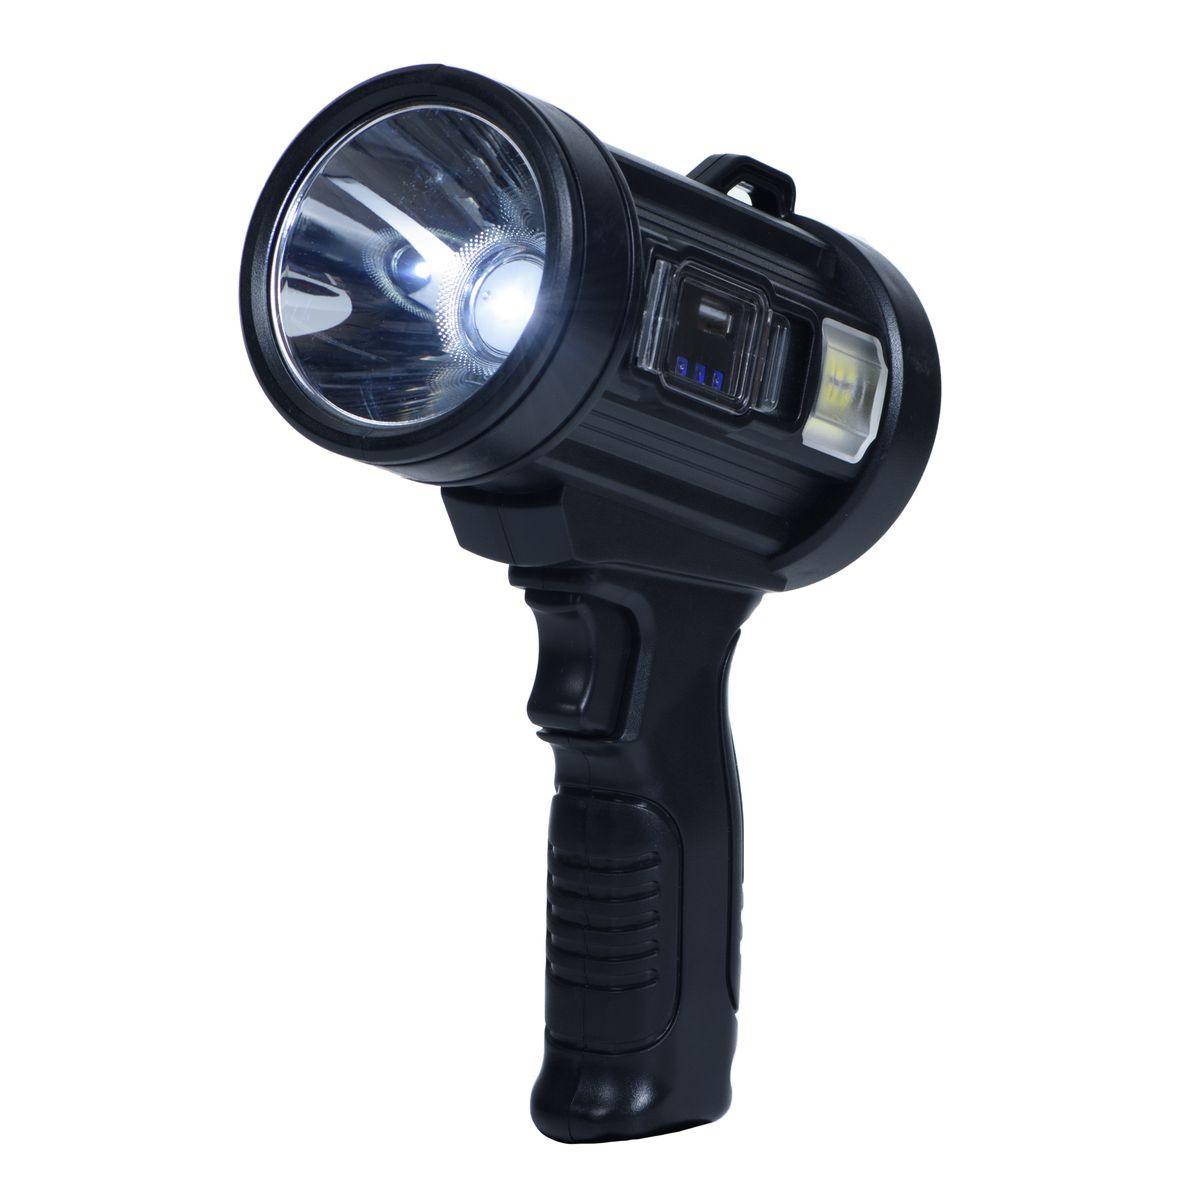 ANDOWL HIGH INTENSITY SEARCHLIGHT - Q-ST113 - NeonSales South Africa